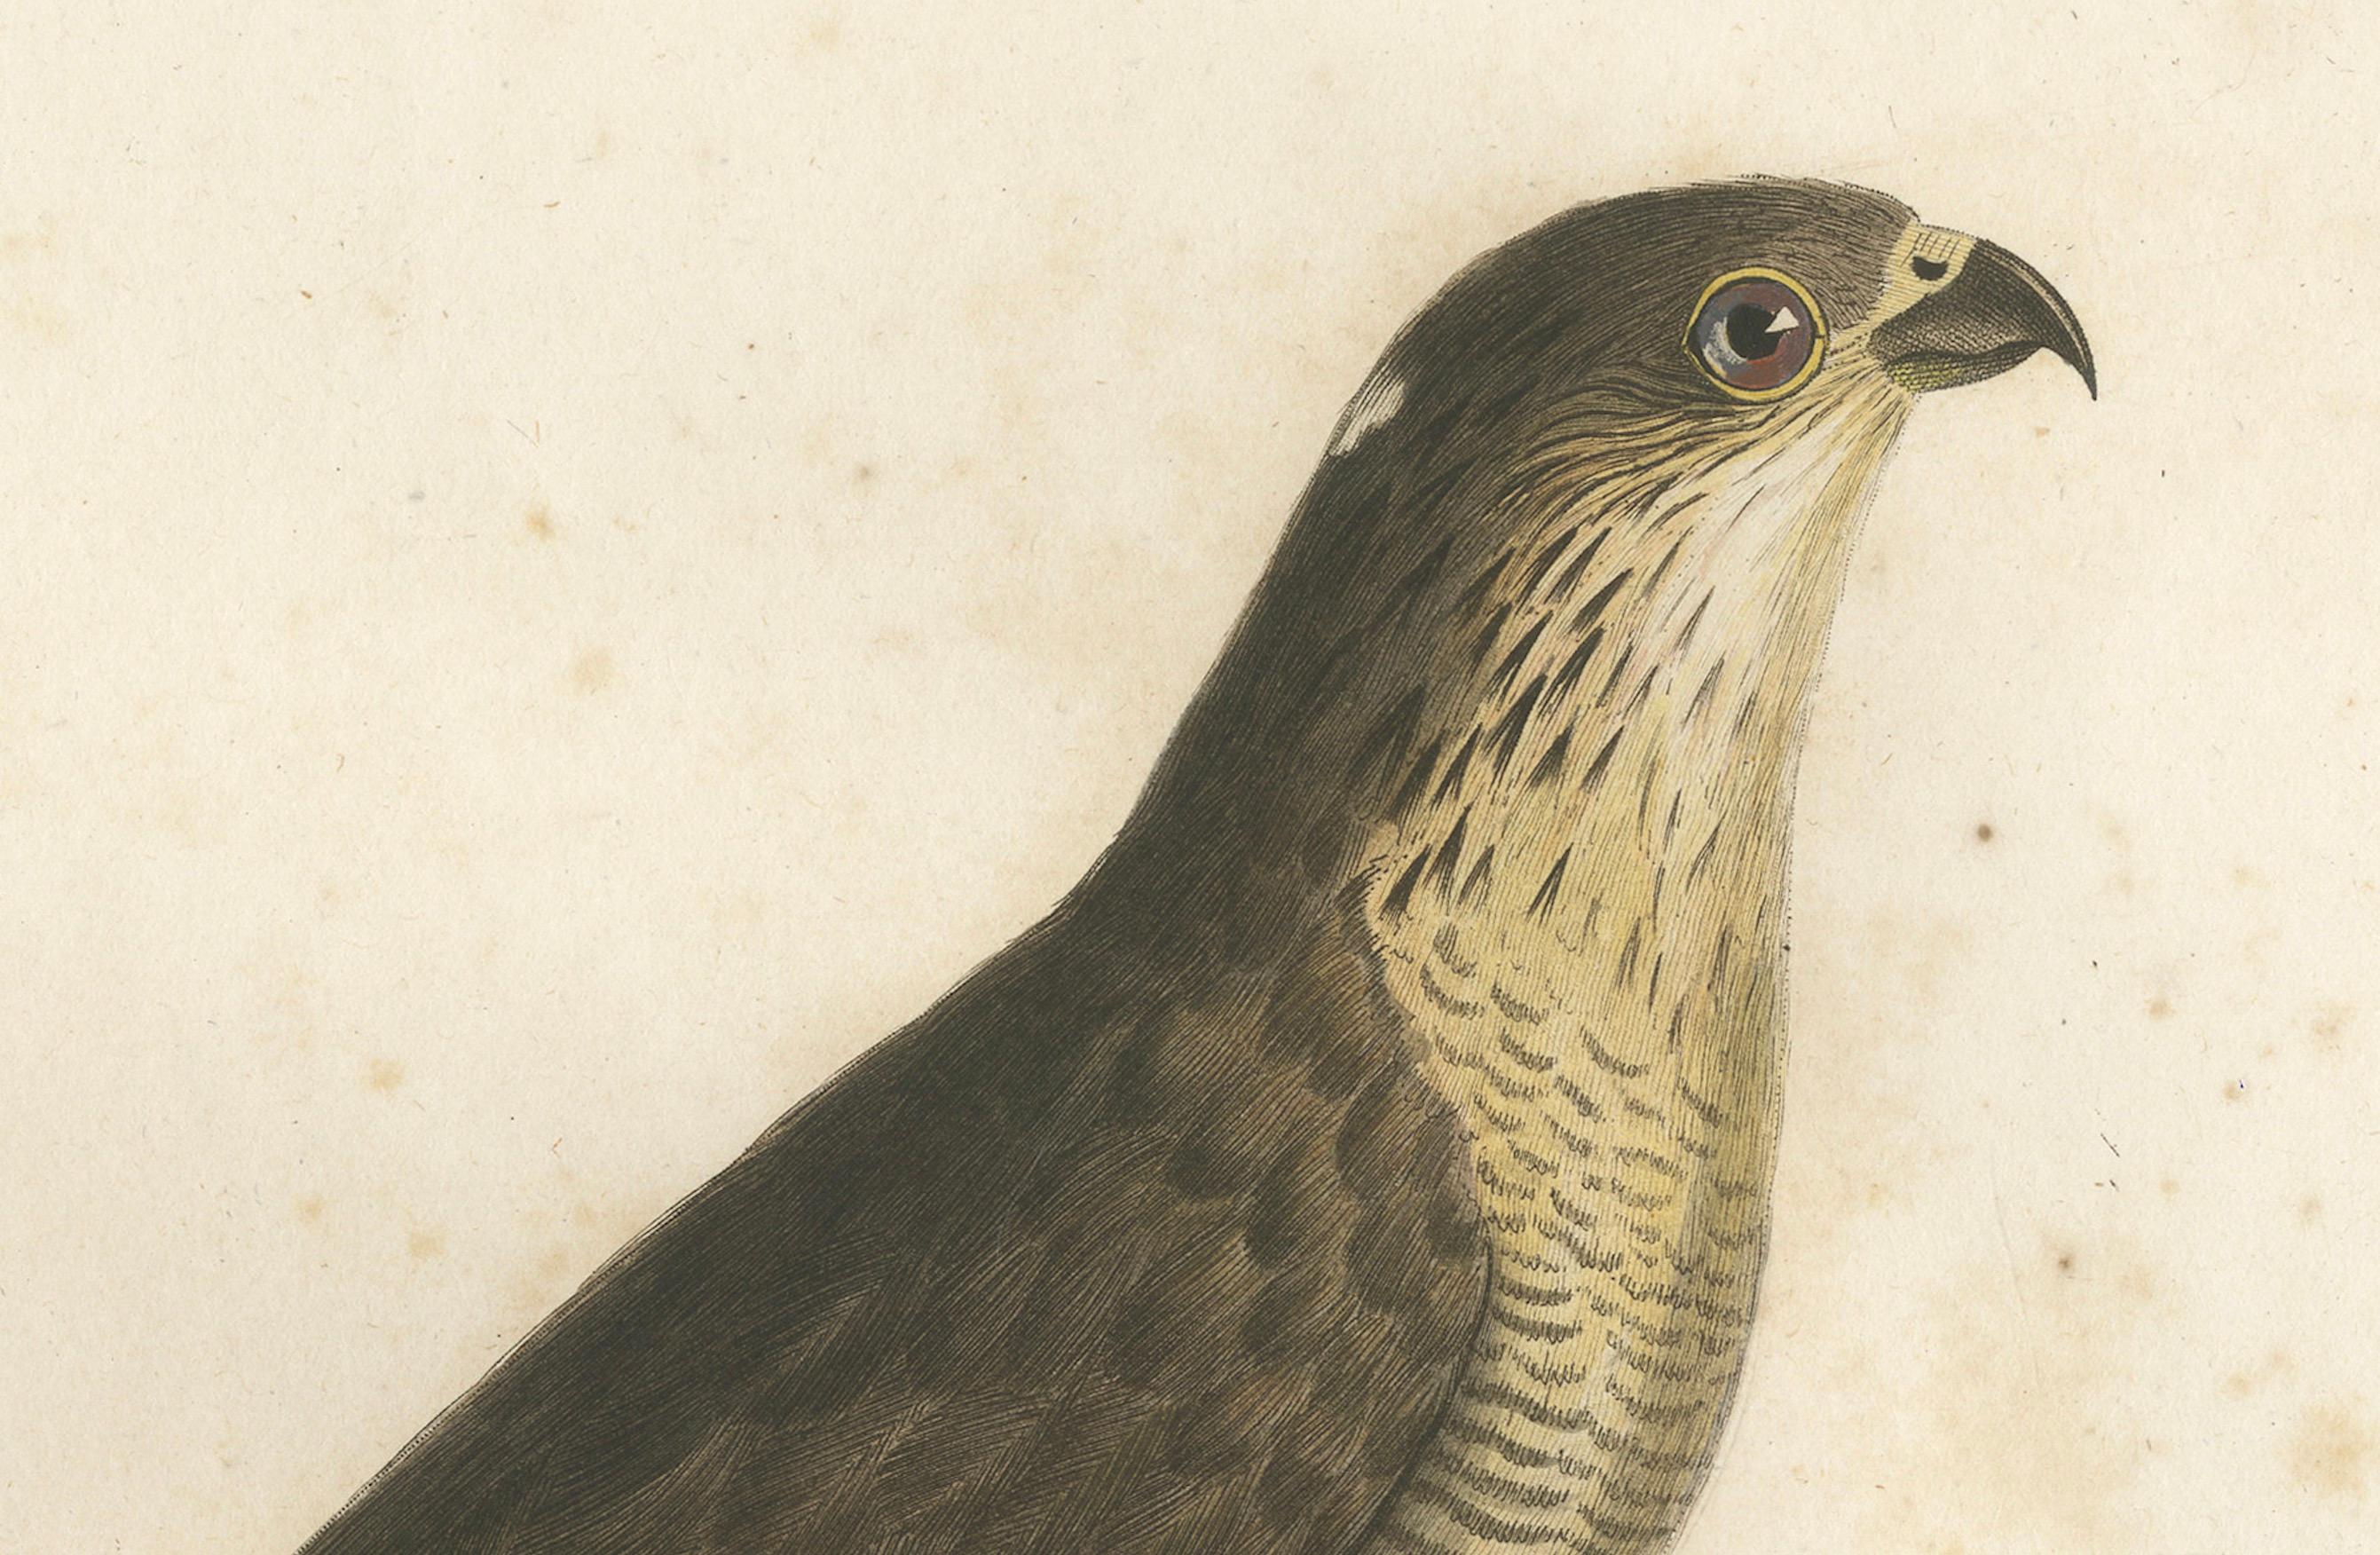 This handcolored antique print, titled 'L'Epervier rayé', depicts a sharp-shinned hawk (Accipiter striatus), also known as a sharpie. The hawk is portrayed in a poised stance, perched on a branch, with its body angled towards the viewer, showcasing